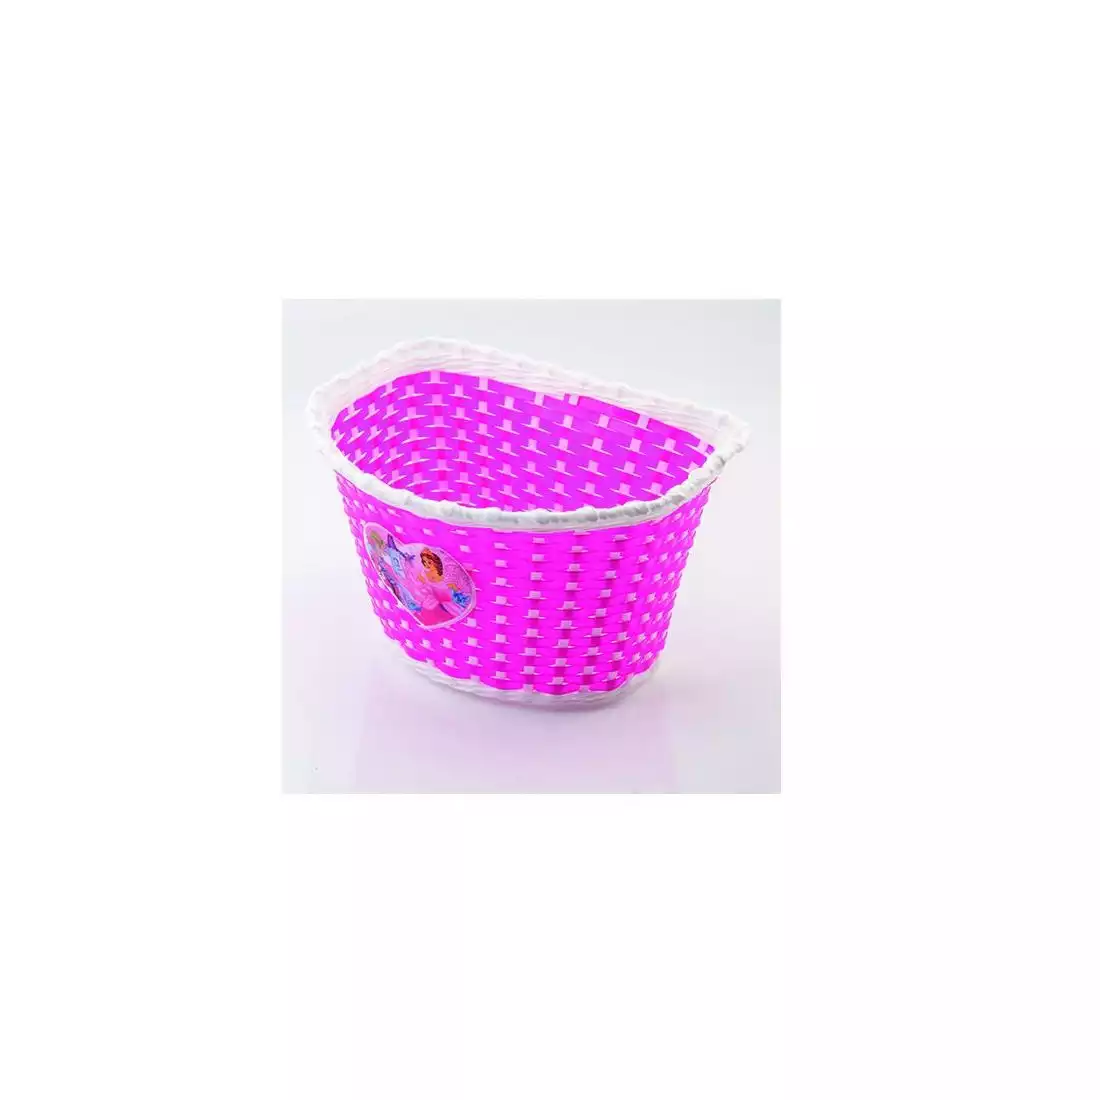 children's bicycle basket on the handlebar, pink-daisy 